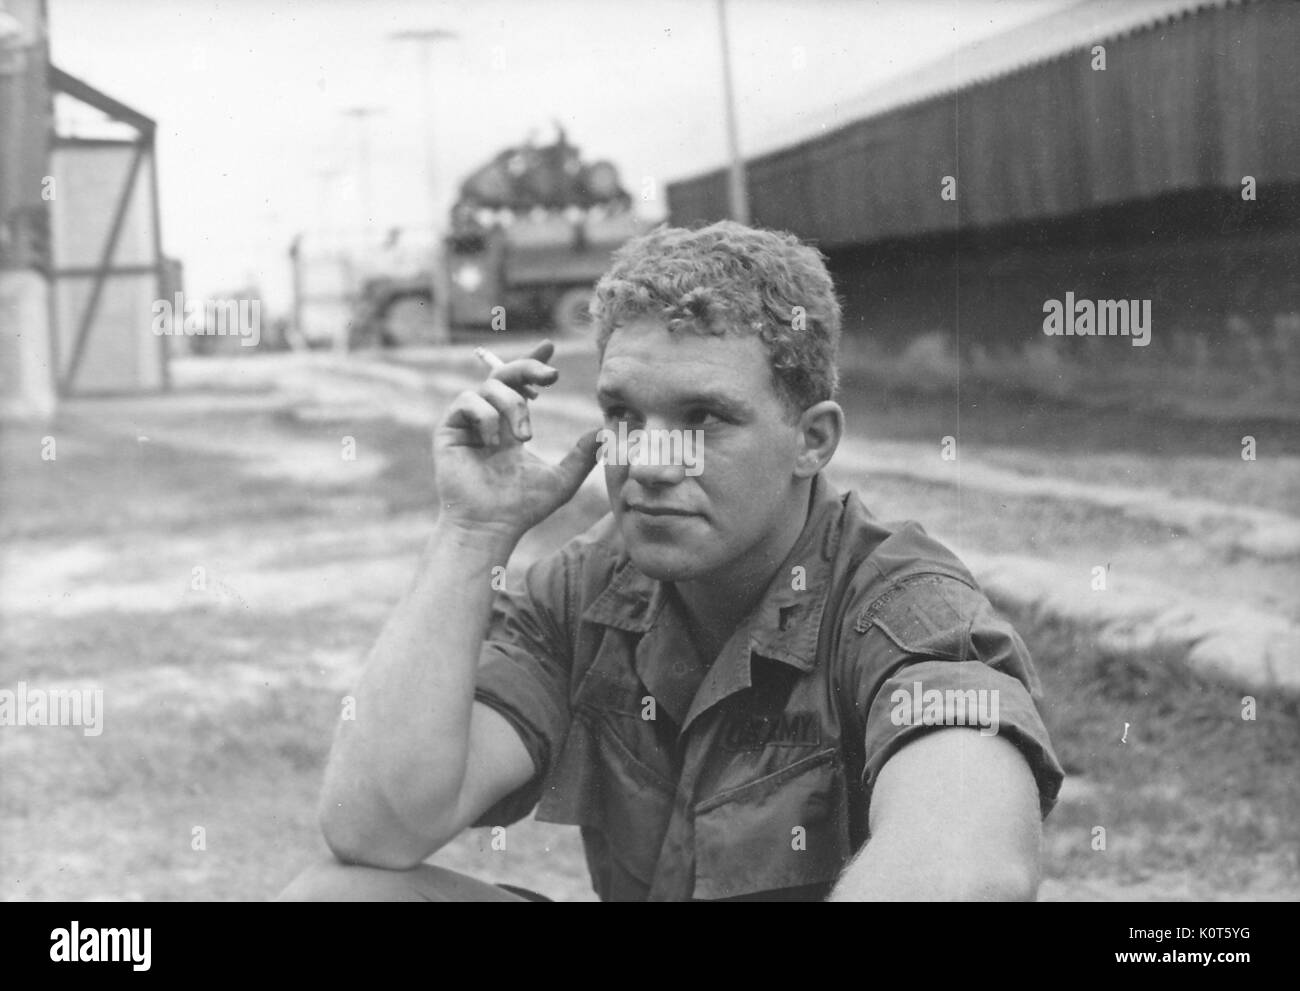 A United States Army serviceman sitting on the ground and smoking a cigarette, buildings and utility poles can be seen on the base behind him, Vietnam, 1967. Stock Photo